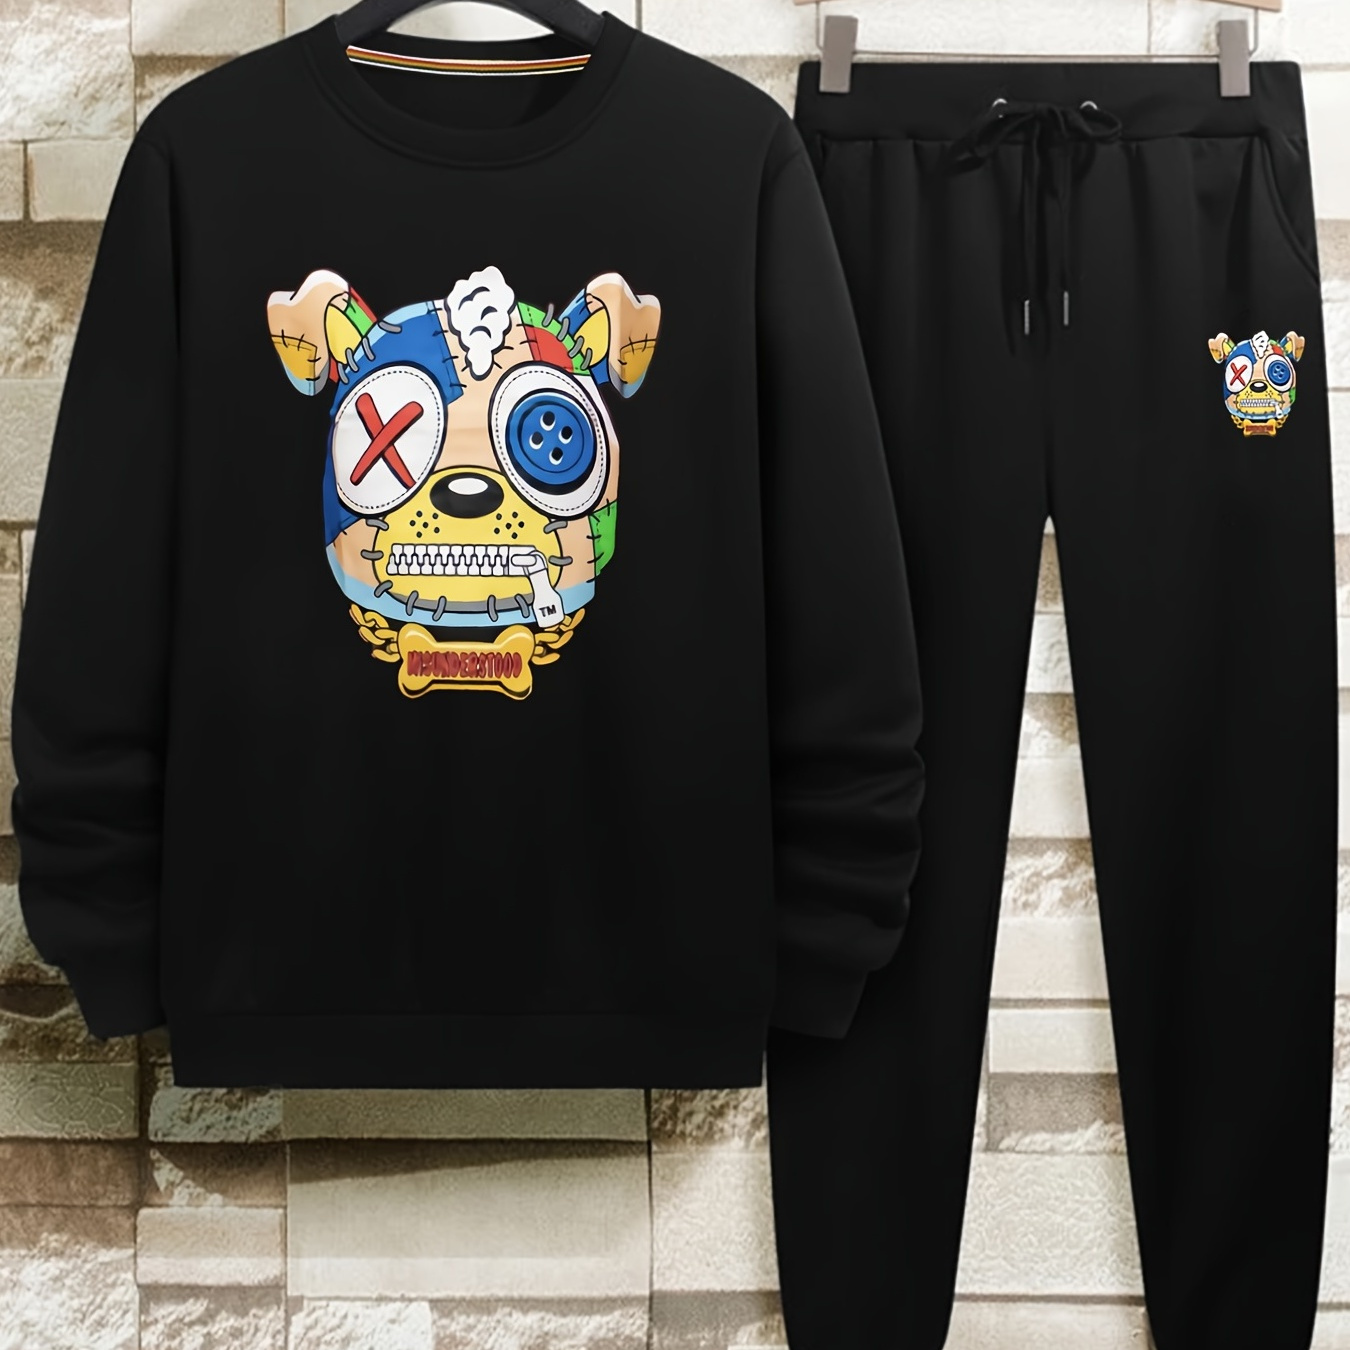 

Men's Anime Monster Graphic Print Round Neck Casual Outfit Set, 2 Pieces Long Sleeve Pullover Sweatshirt And Drawstring Sweatpants